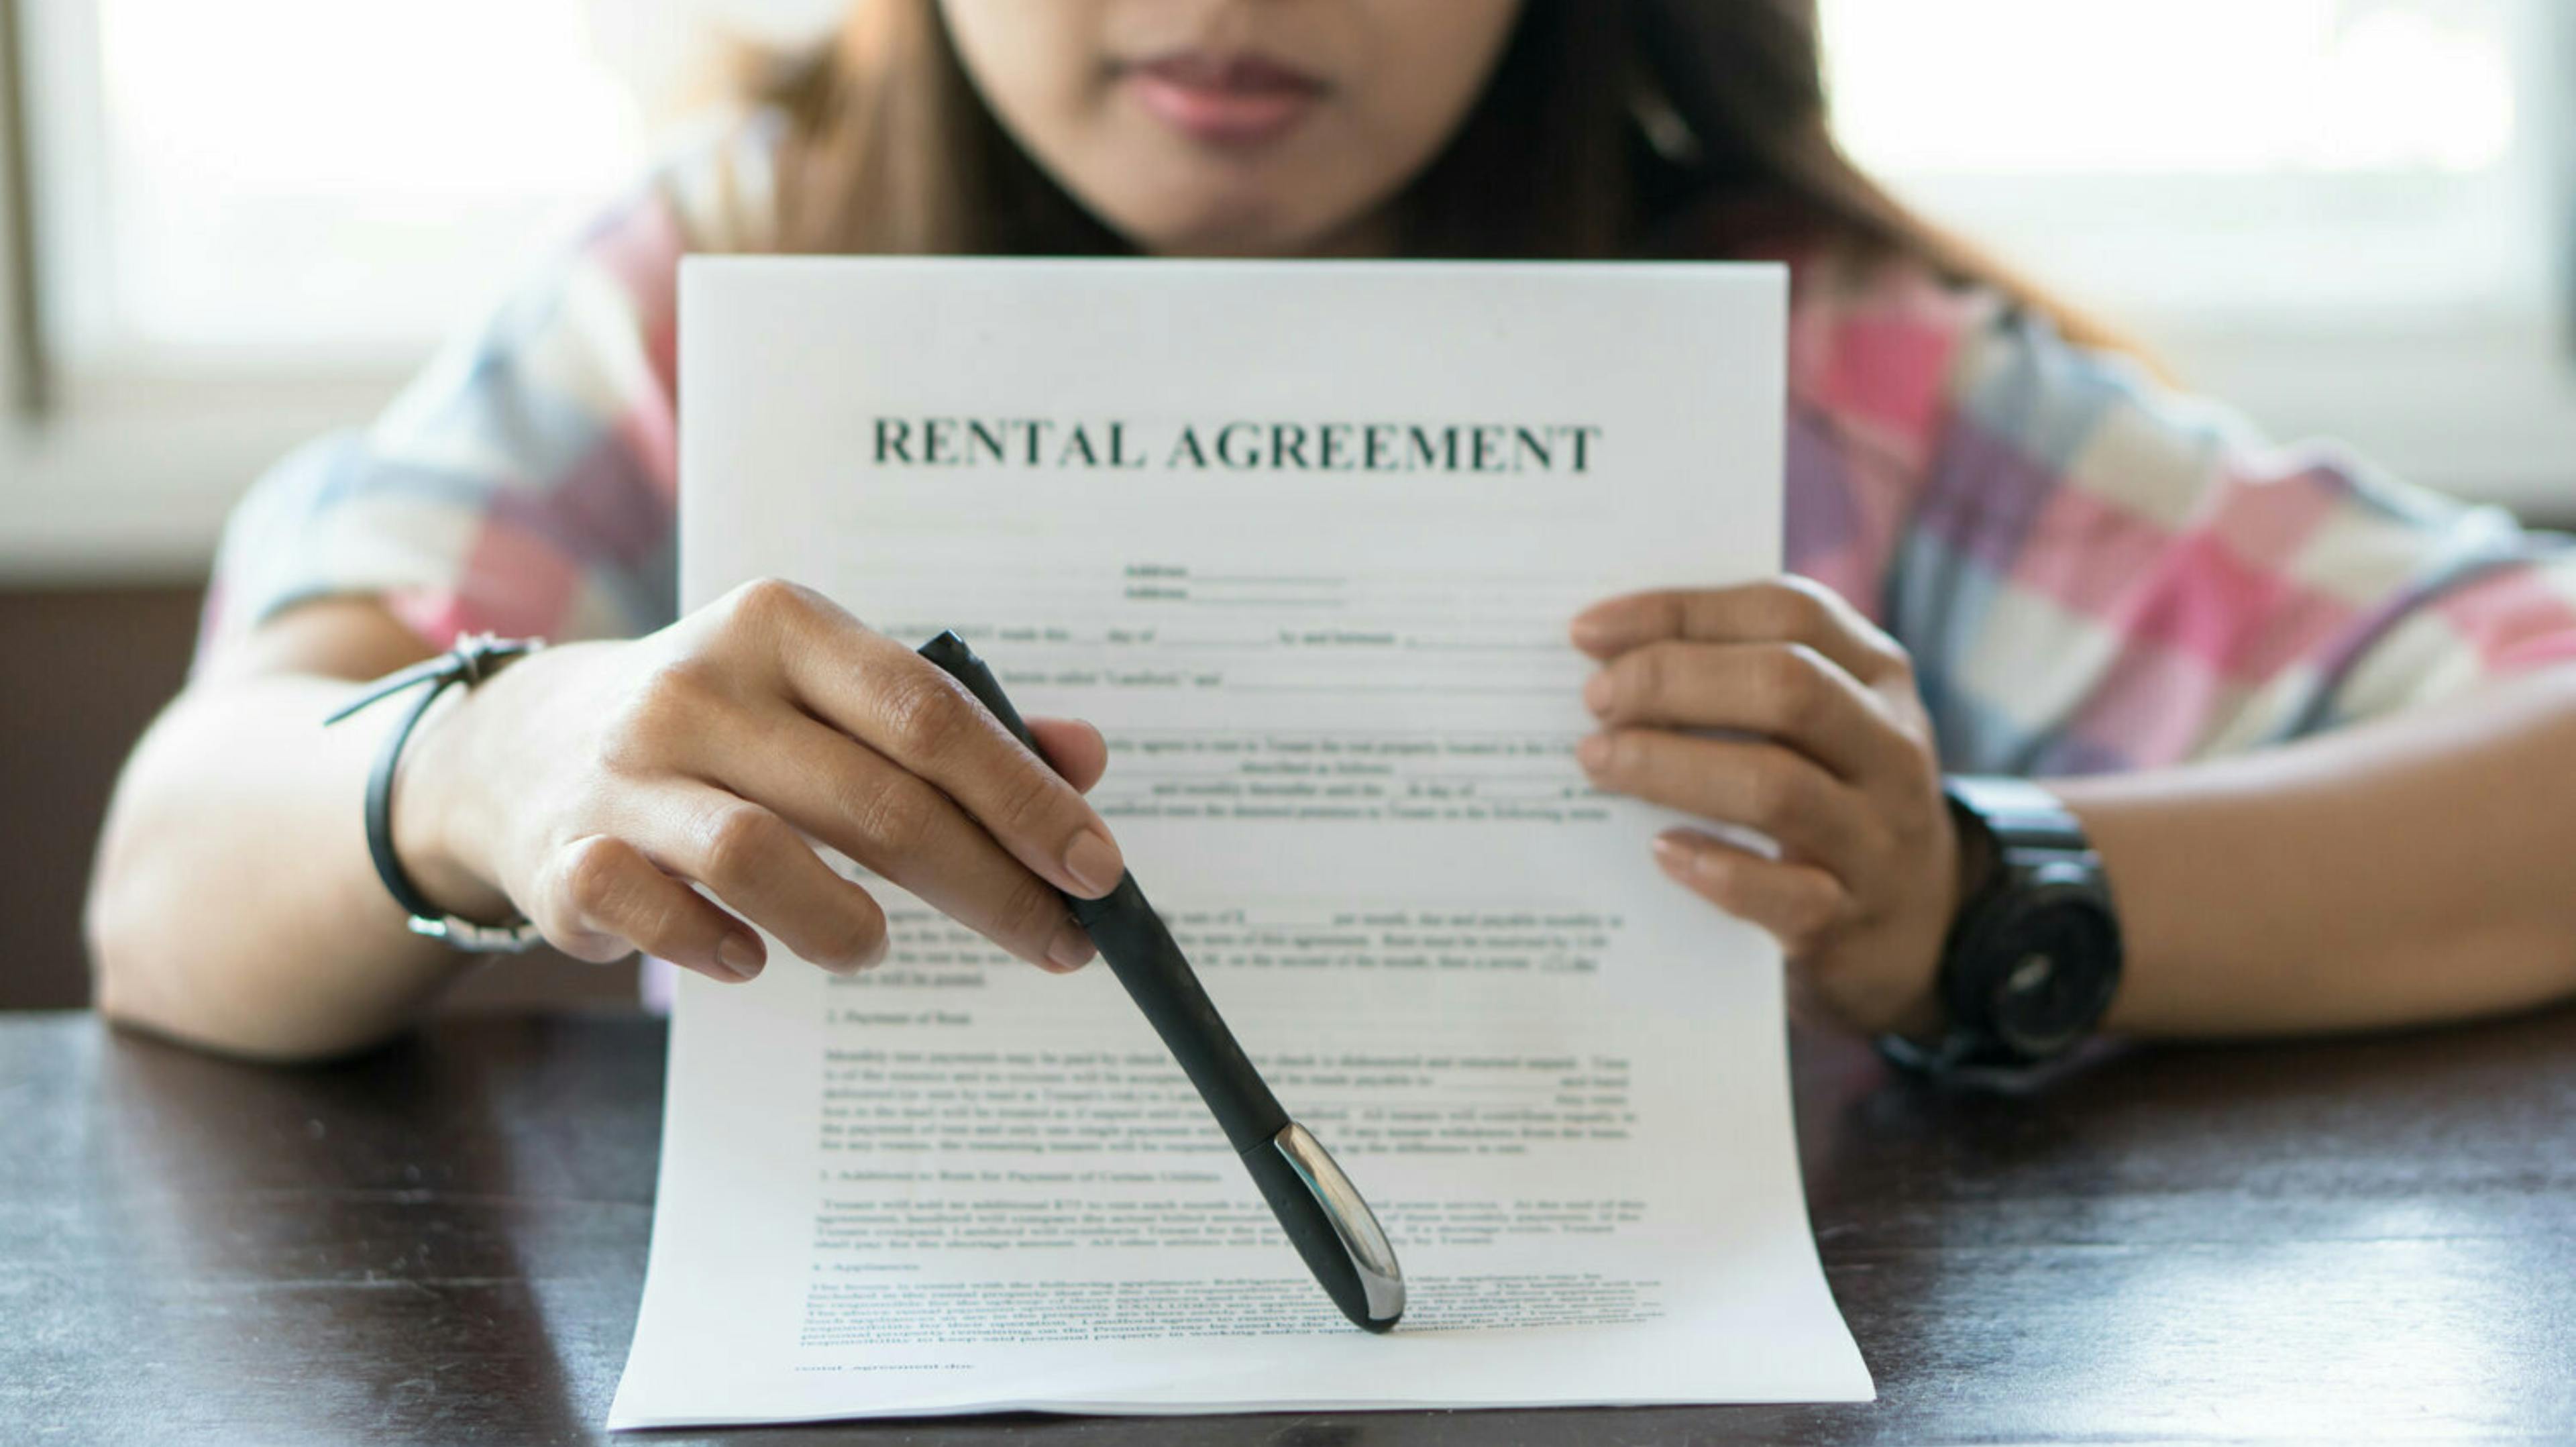 The New Rules For Landlords